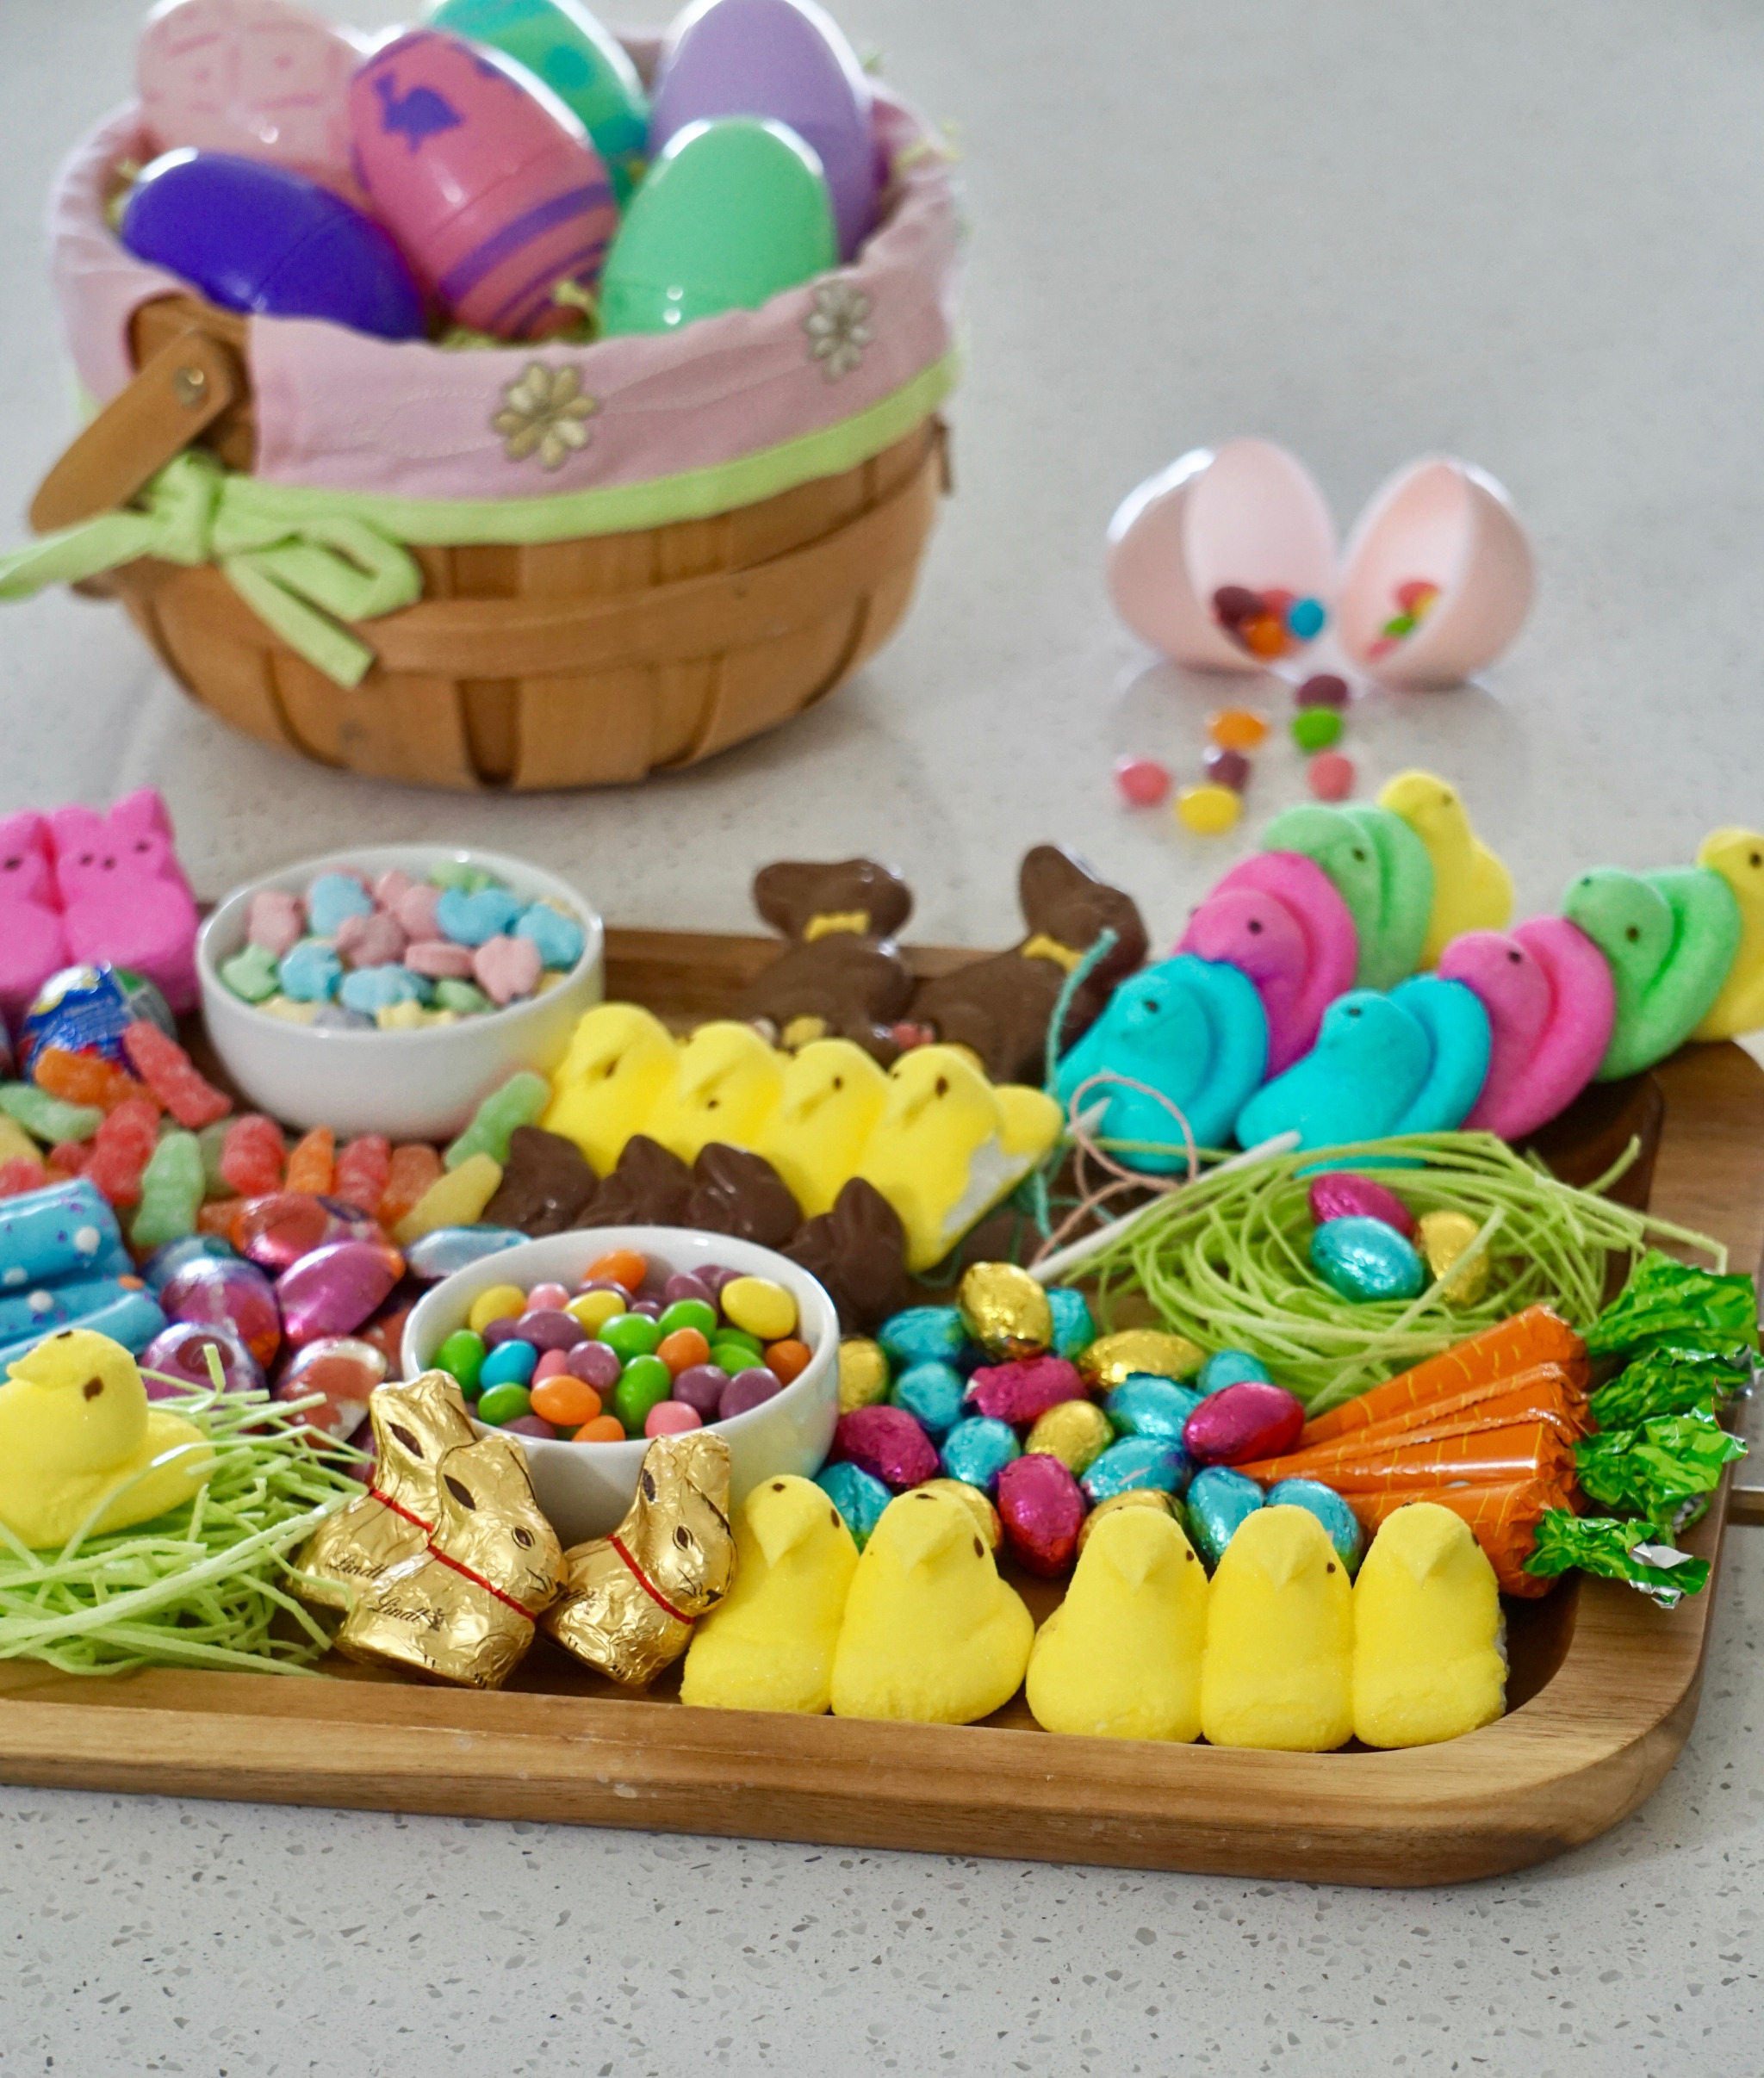 How to make a candy platter for Easter